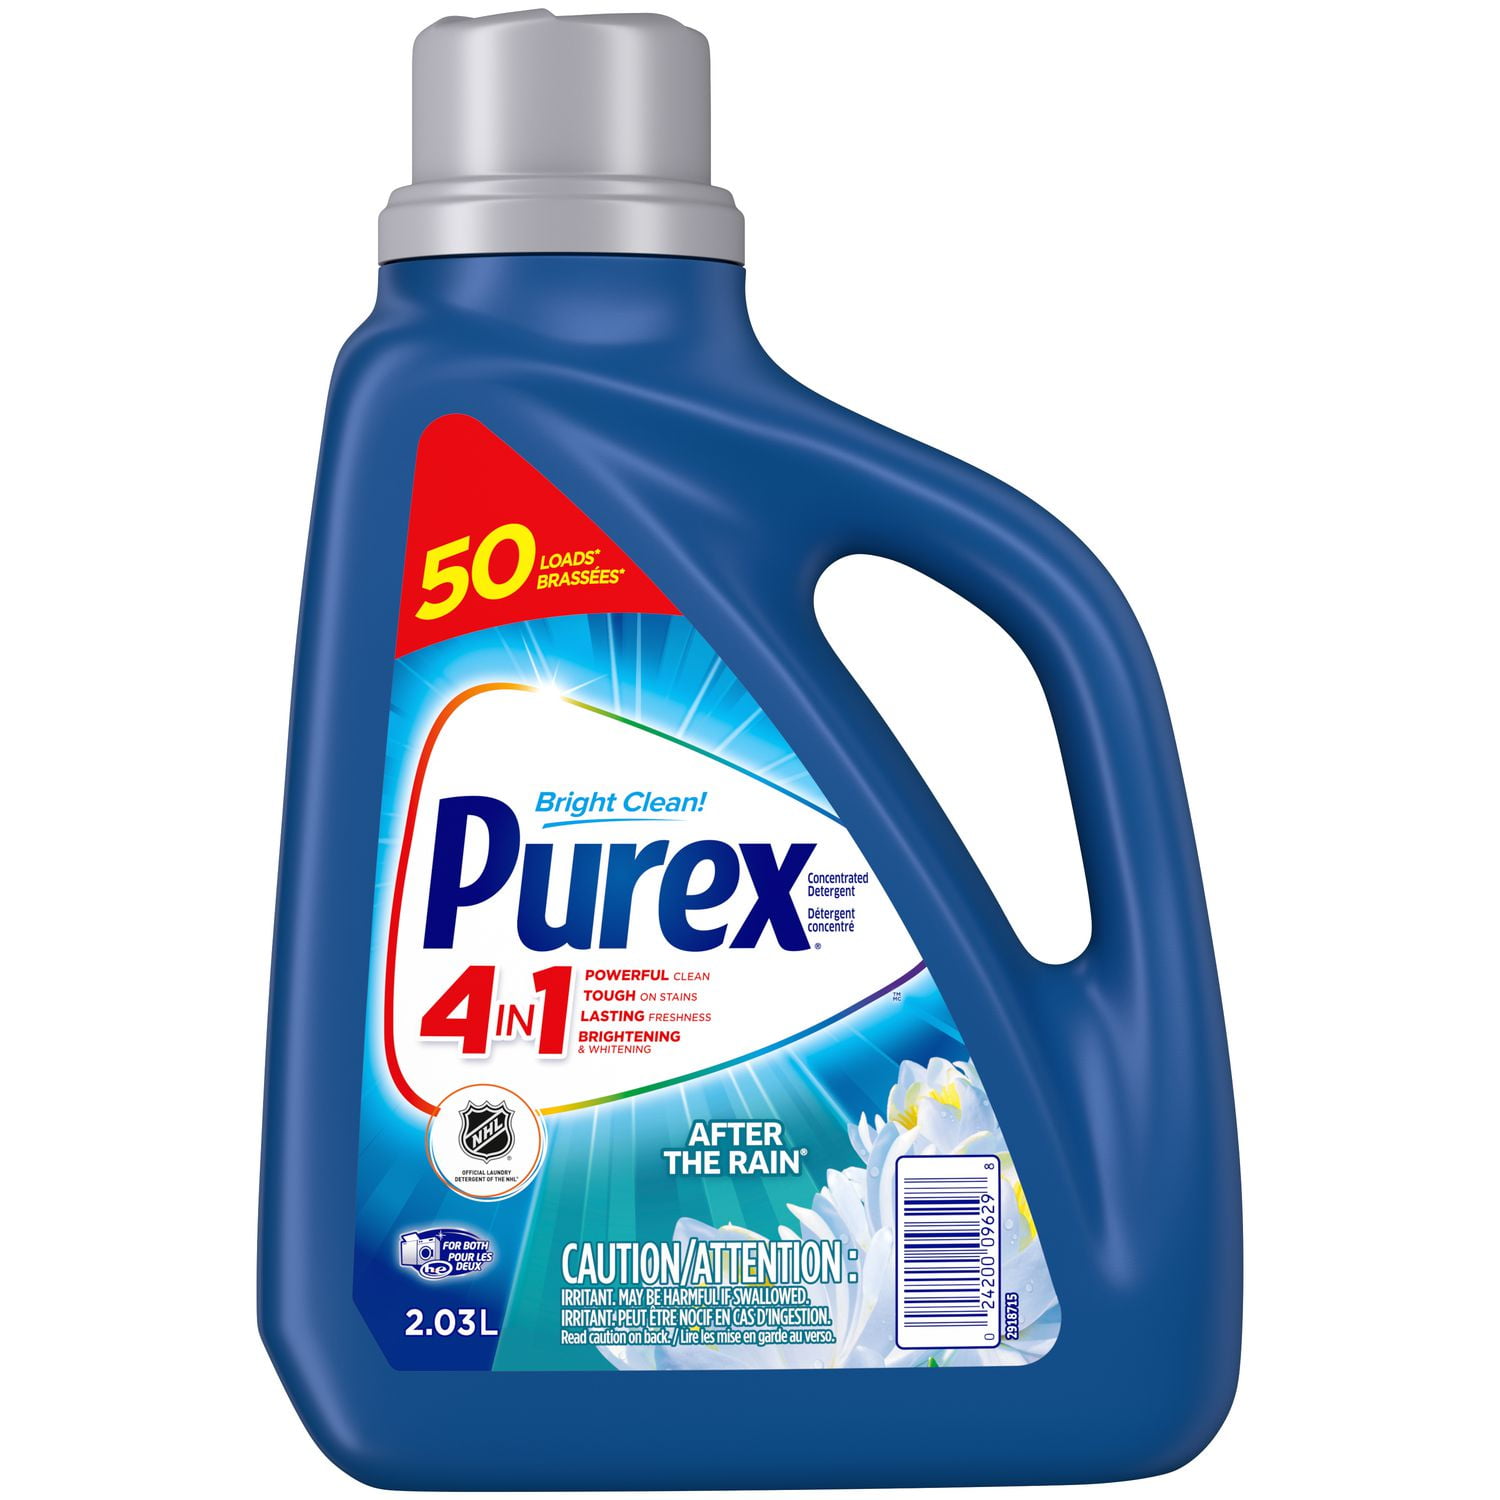 Purex 4 in 1 Liquid Laundry Concentrated Detergent, After The Rain